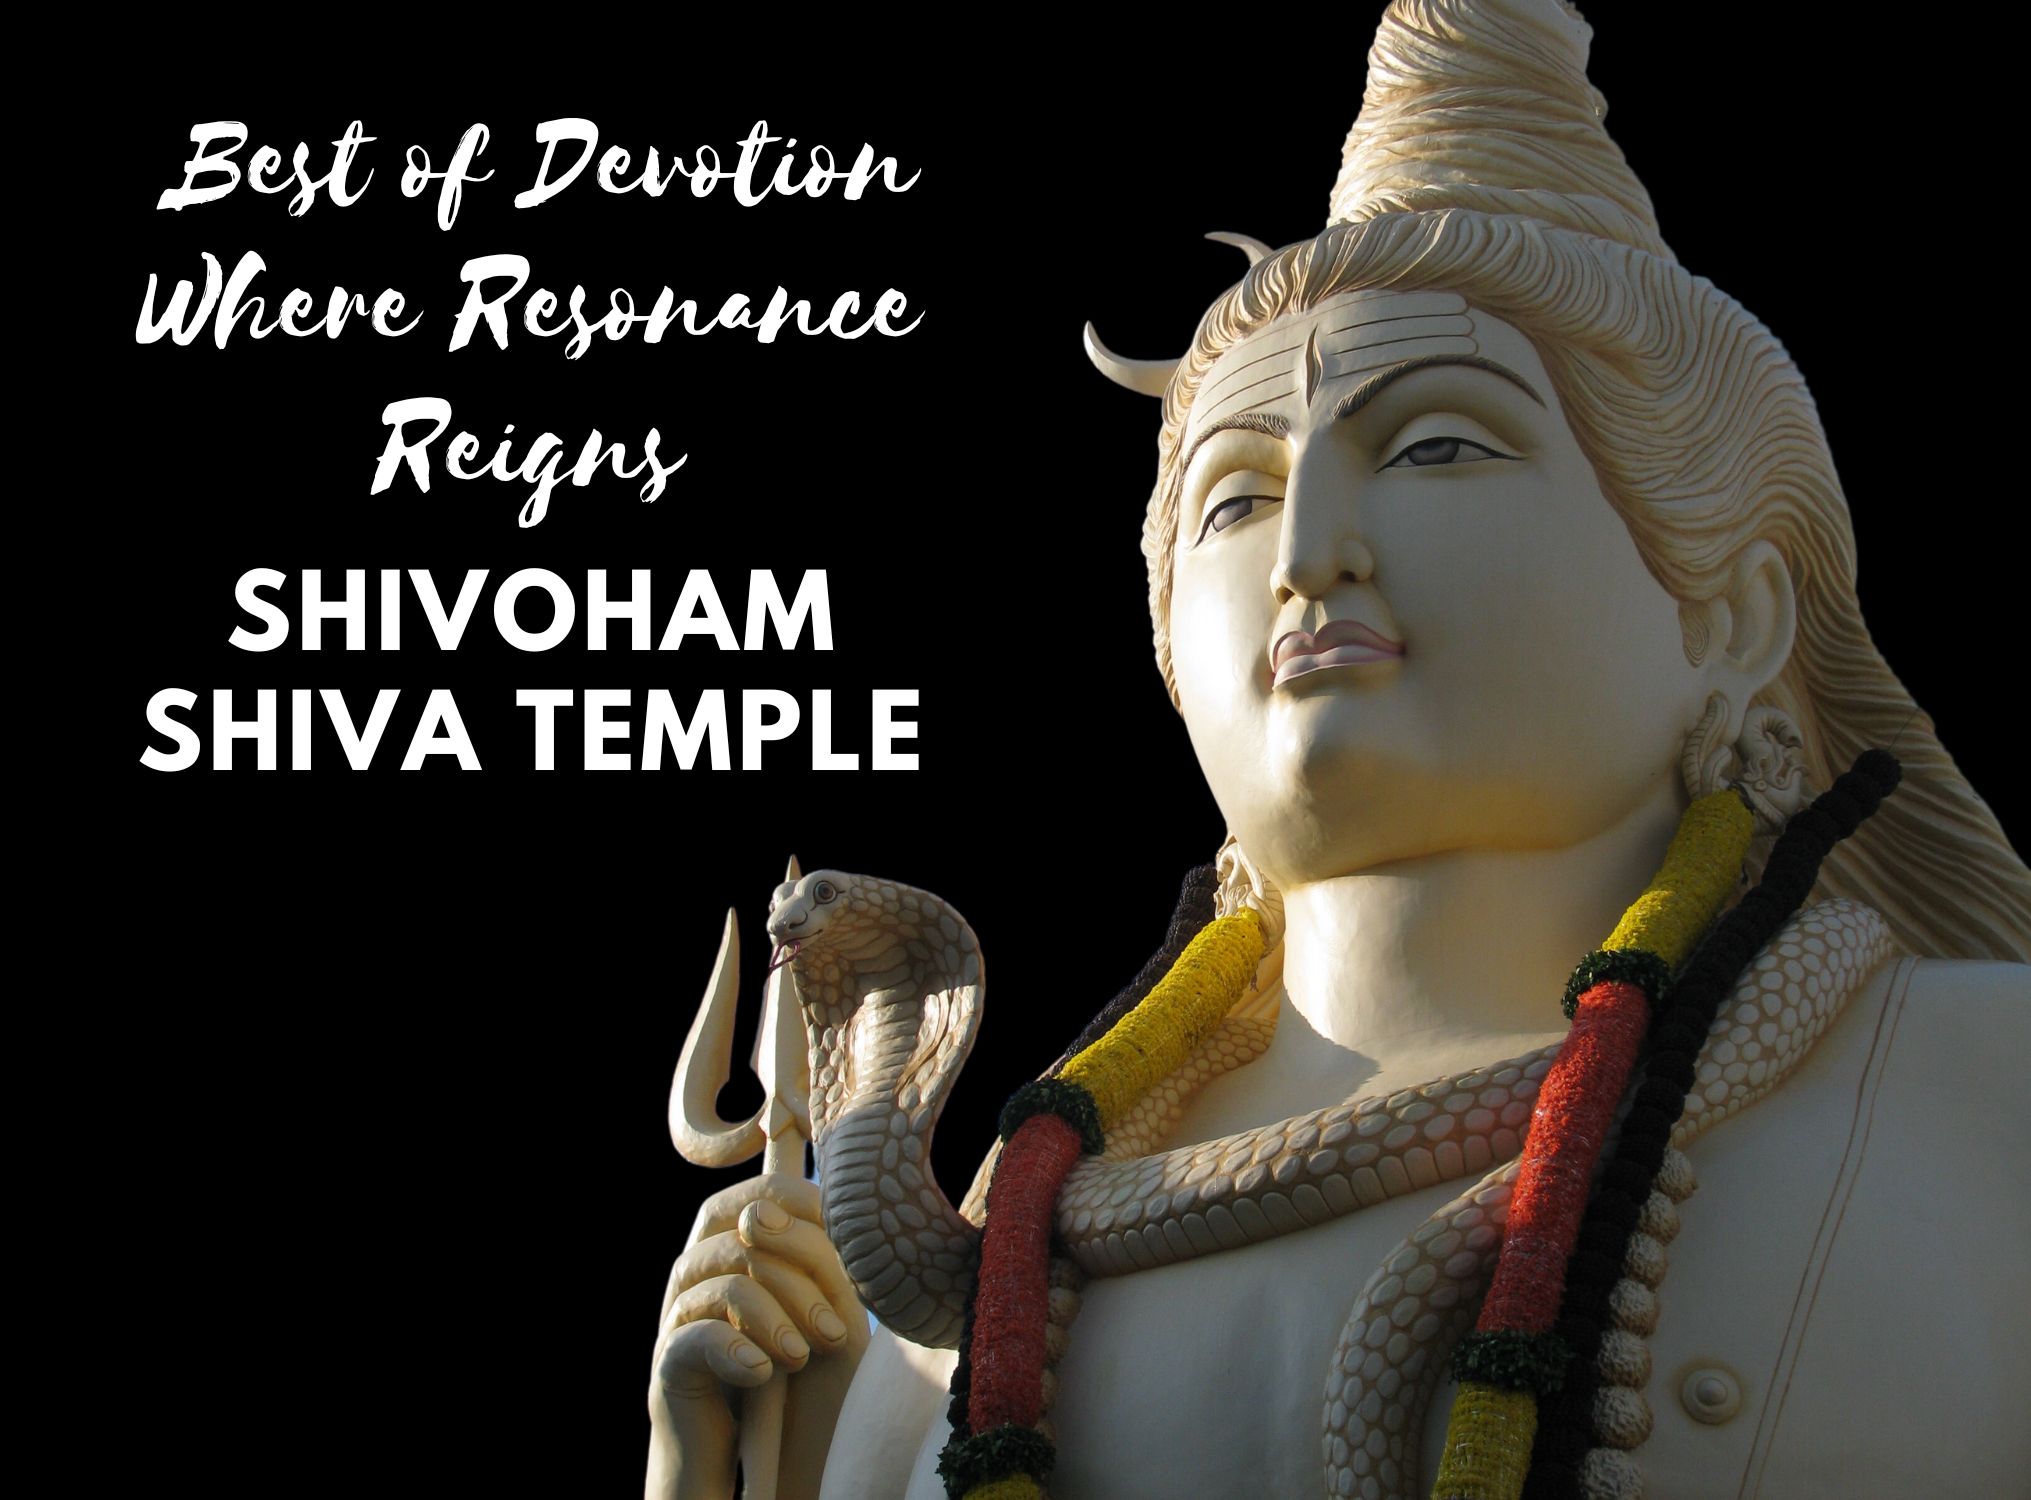 You are currently viewing Shivoham Shiva Temple: Experience 12 Best of Devotion Where Resonance Reigns